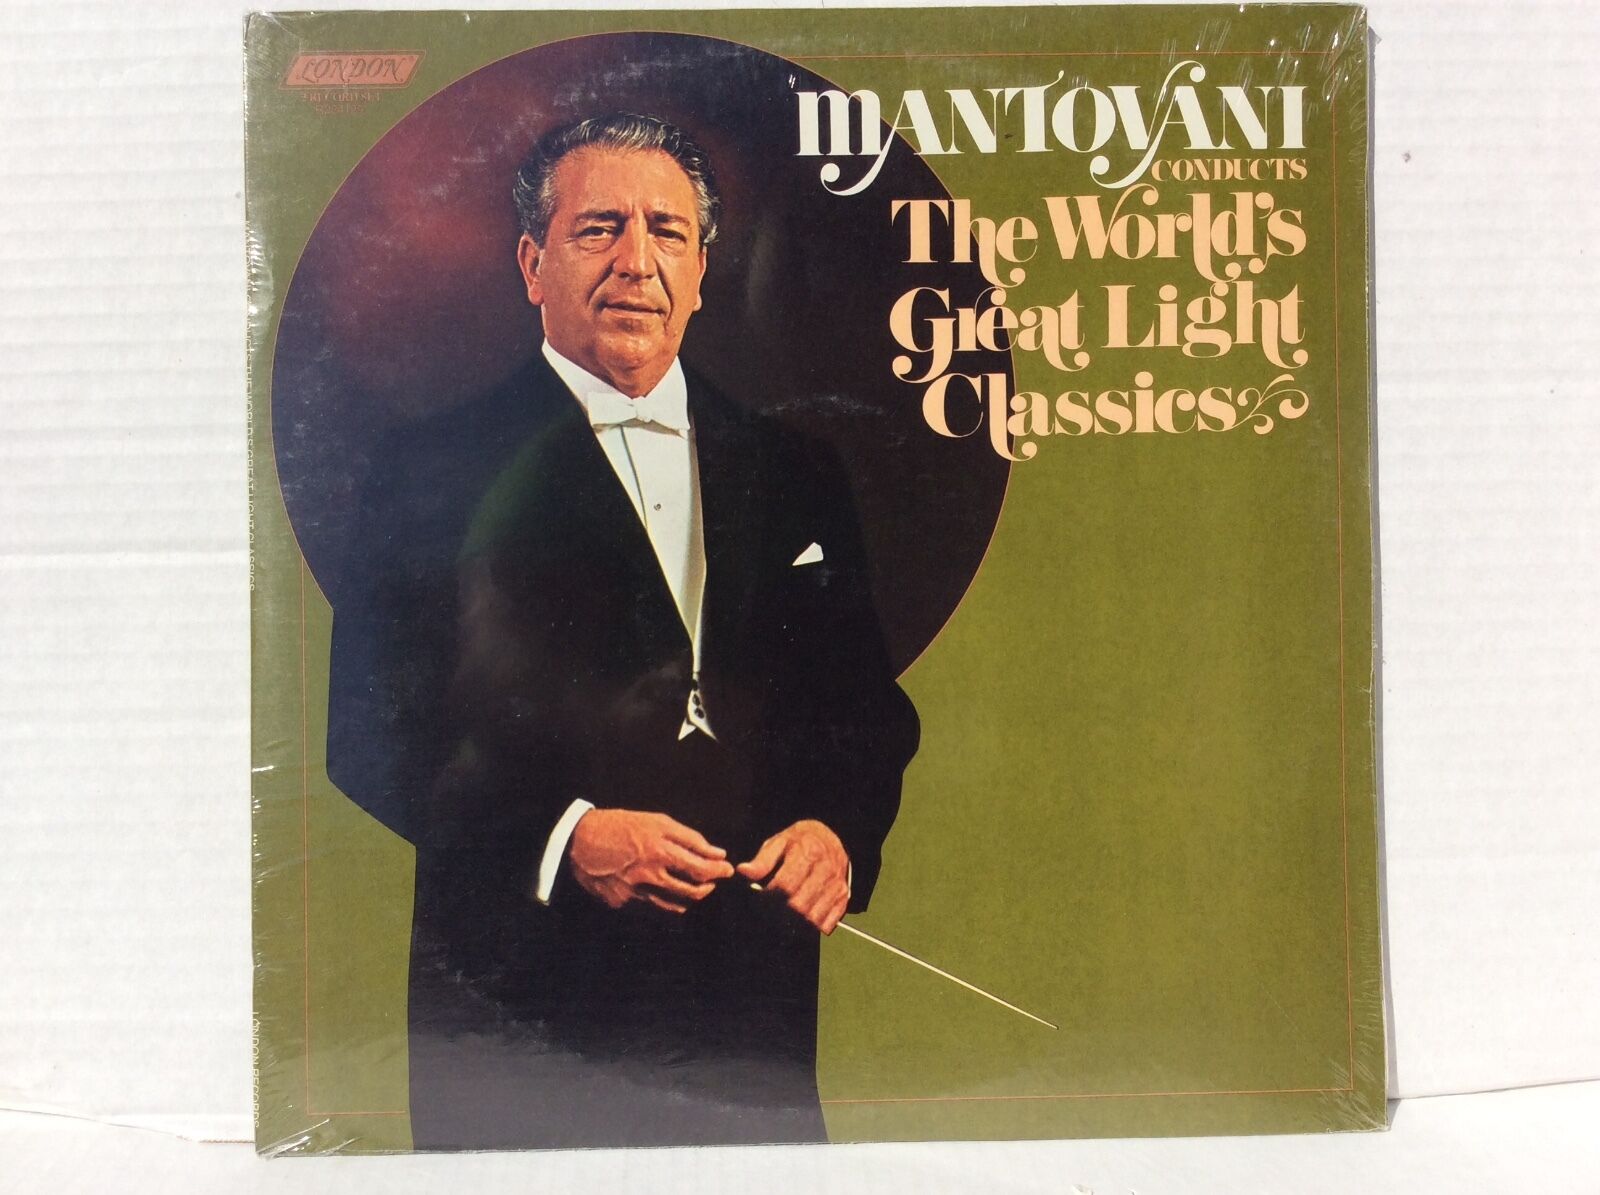 1974 Mantovani: Conducts the World\'s Great Light Classics vinyl 2 LPs SEALED